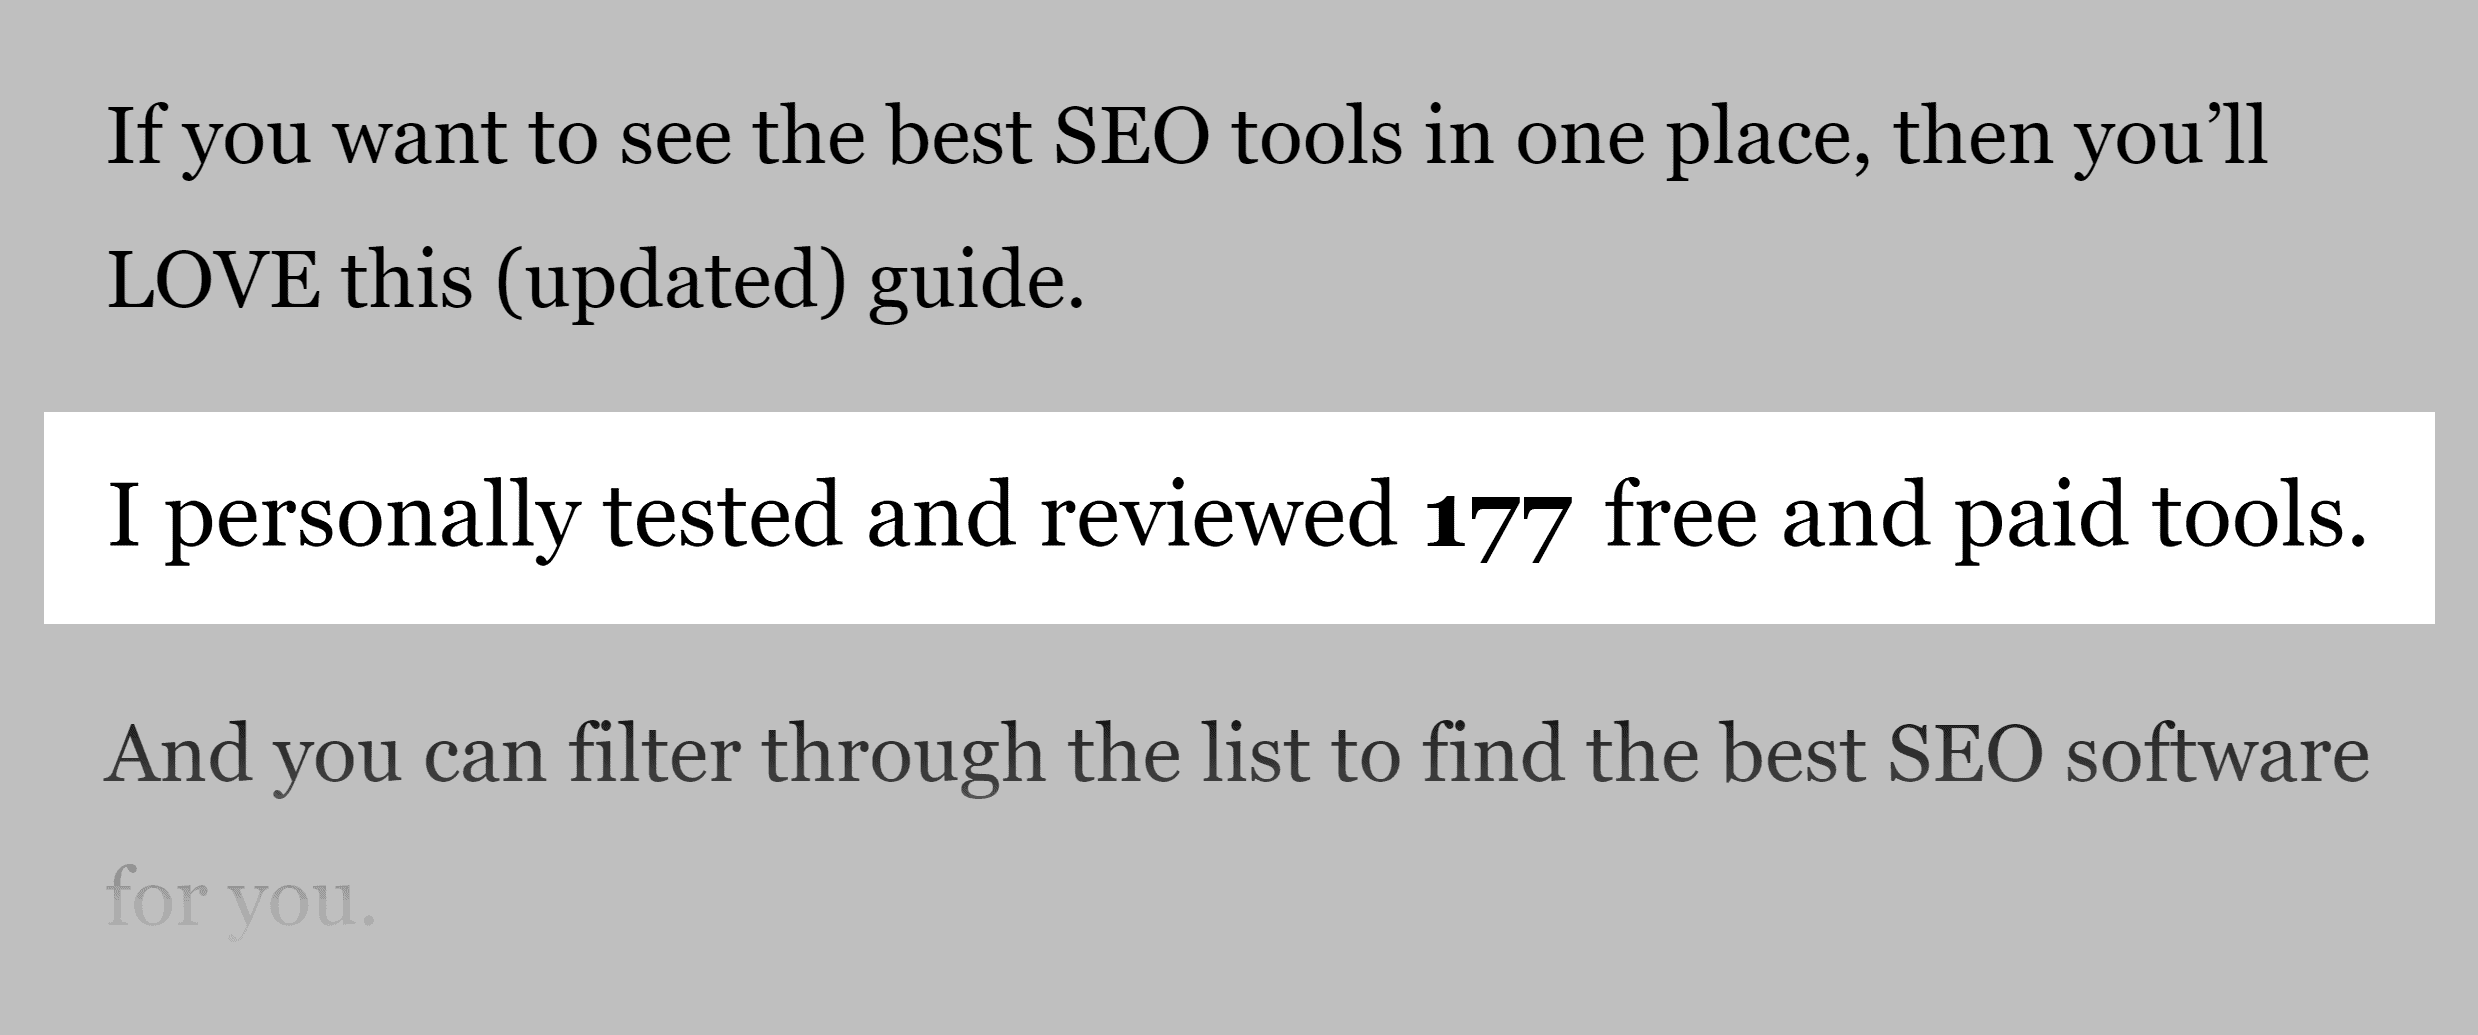 SEO tools – Number of tools